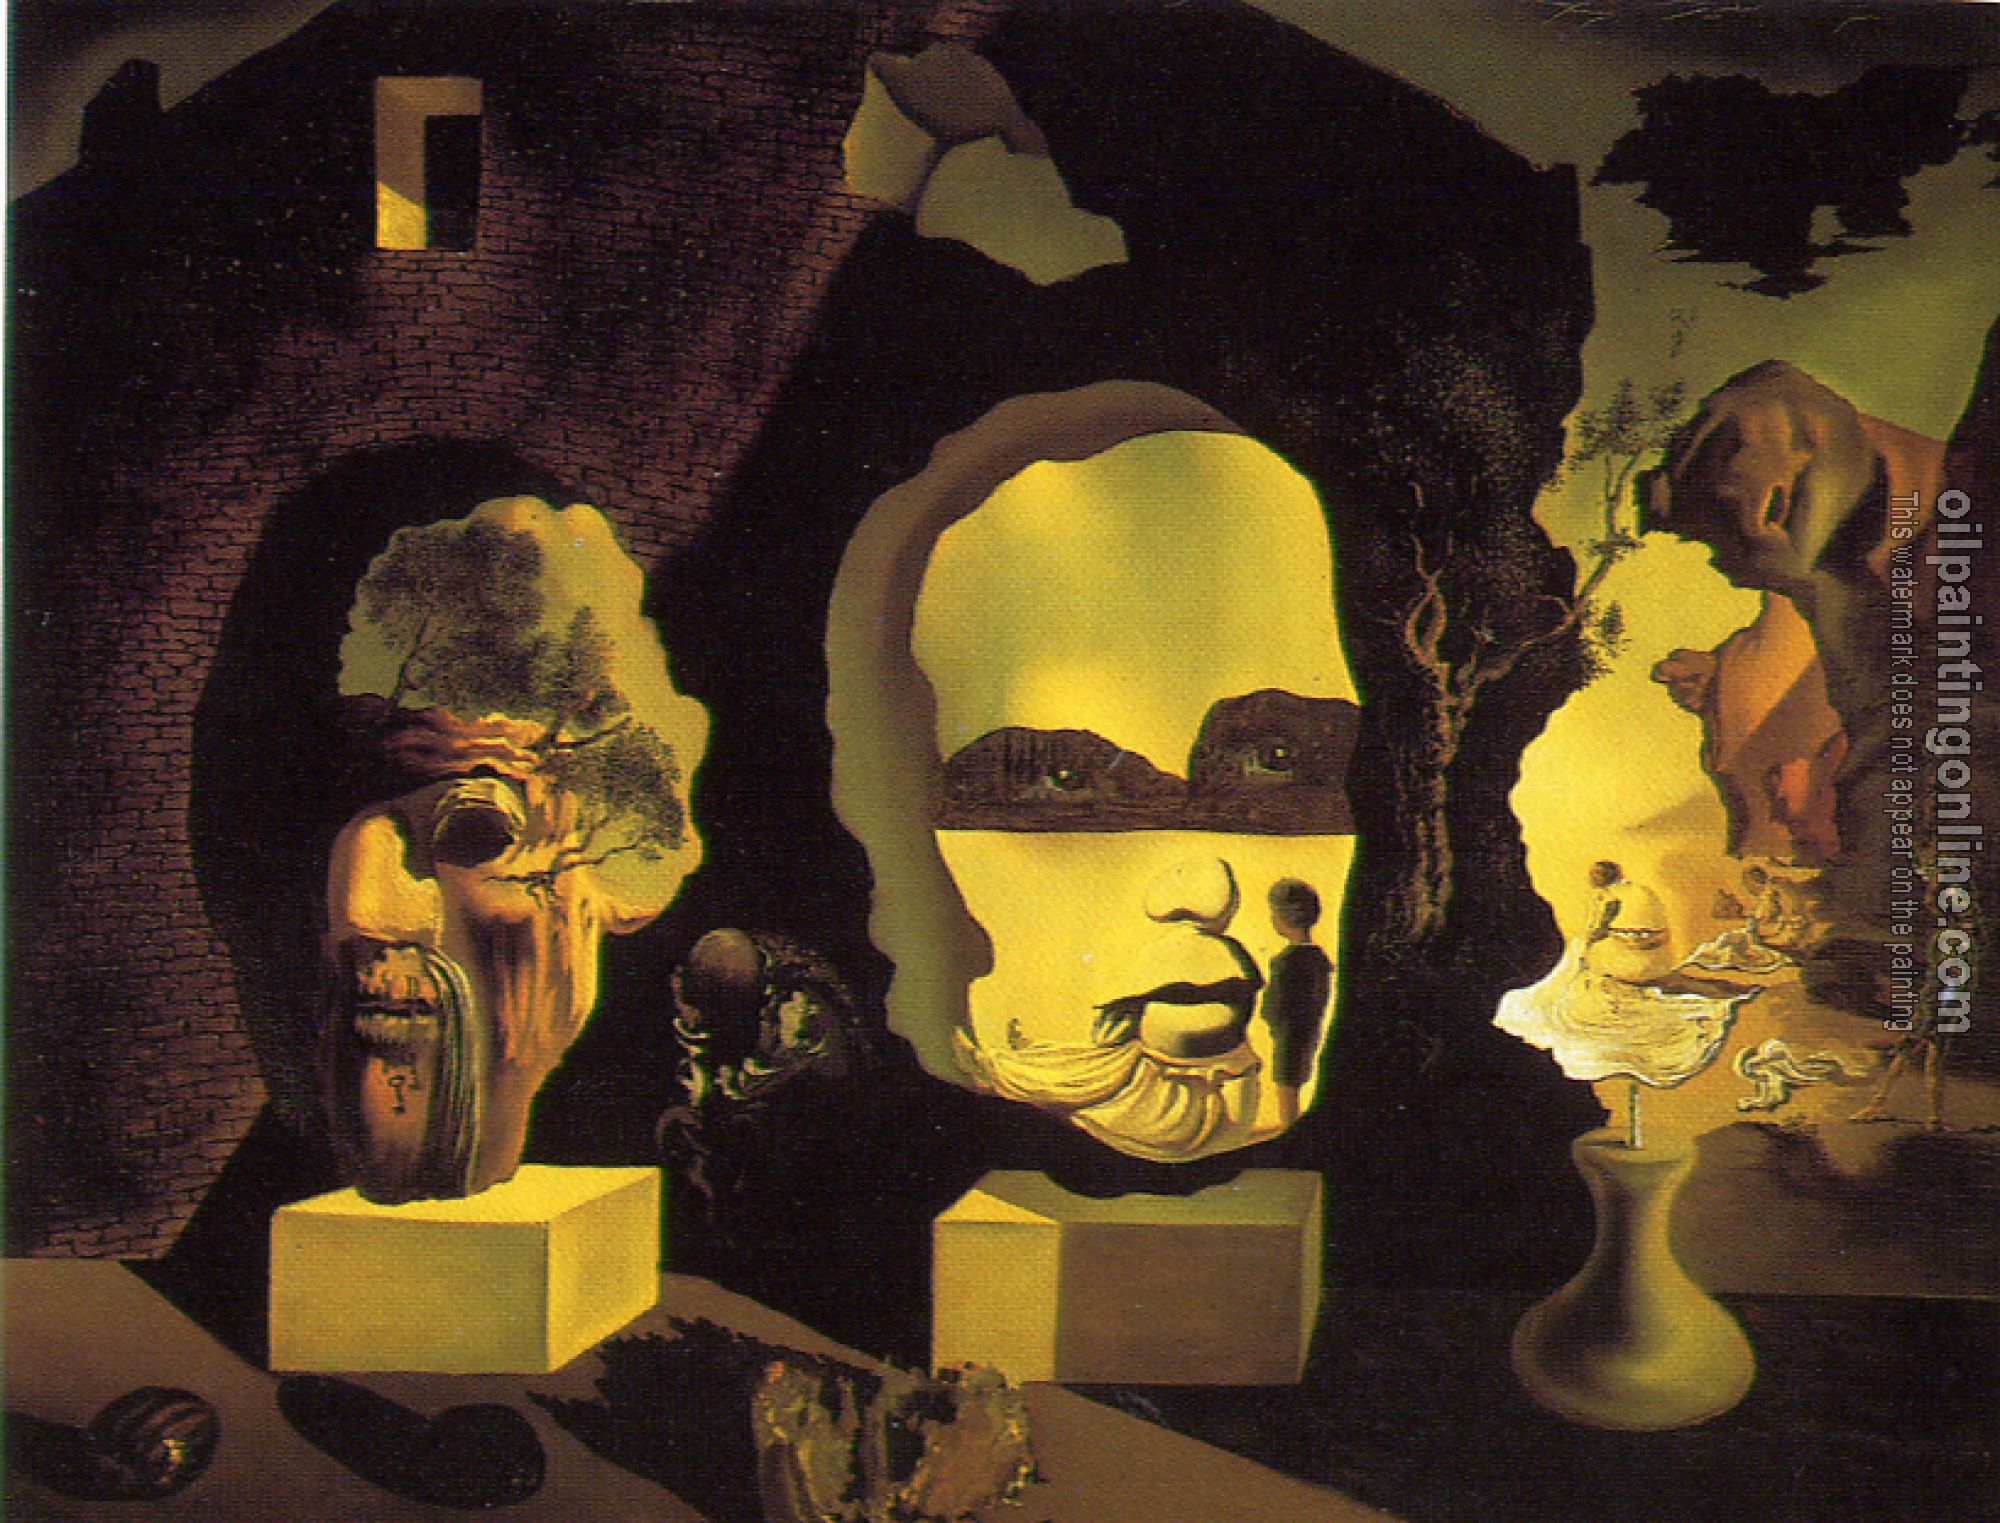 Dali, Salvador - Old Age,Adolescence,Infancy (The Three Ages)